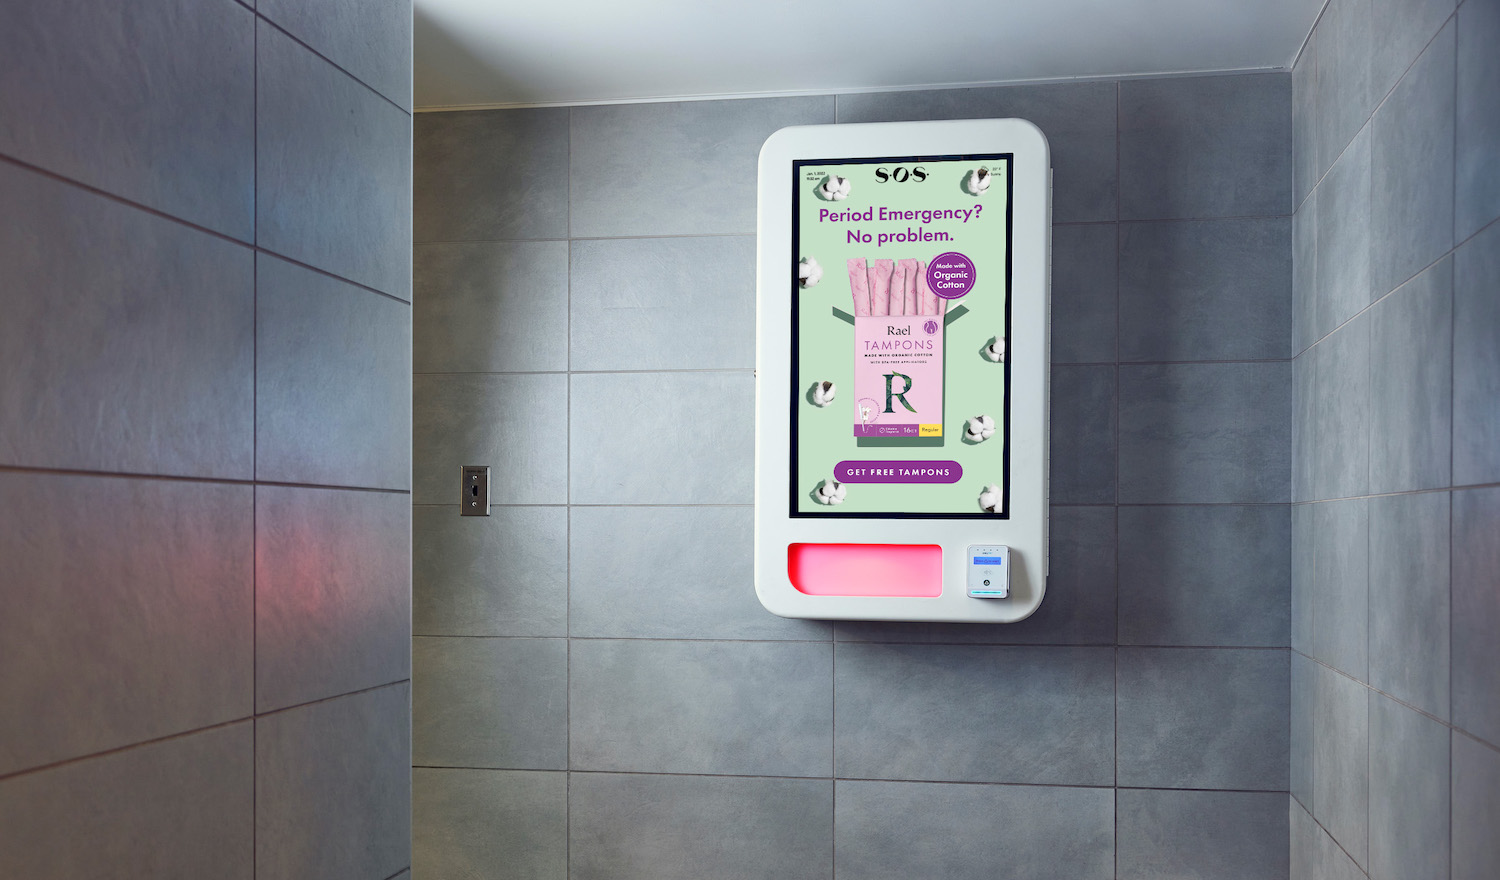 An ad for Rael tampons is displayed on a SOS vending machine in a bathroom.